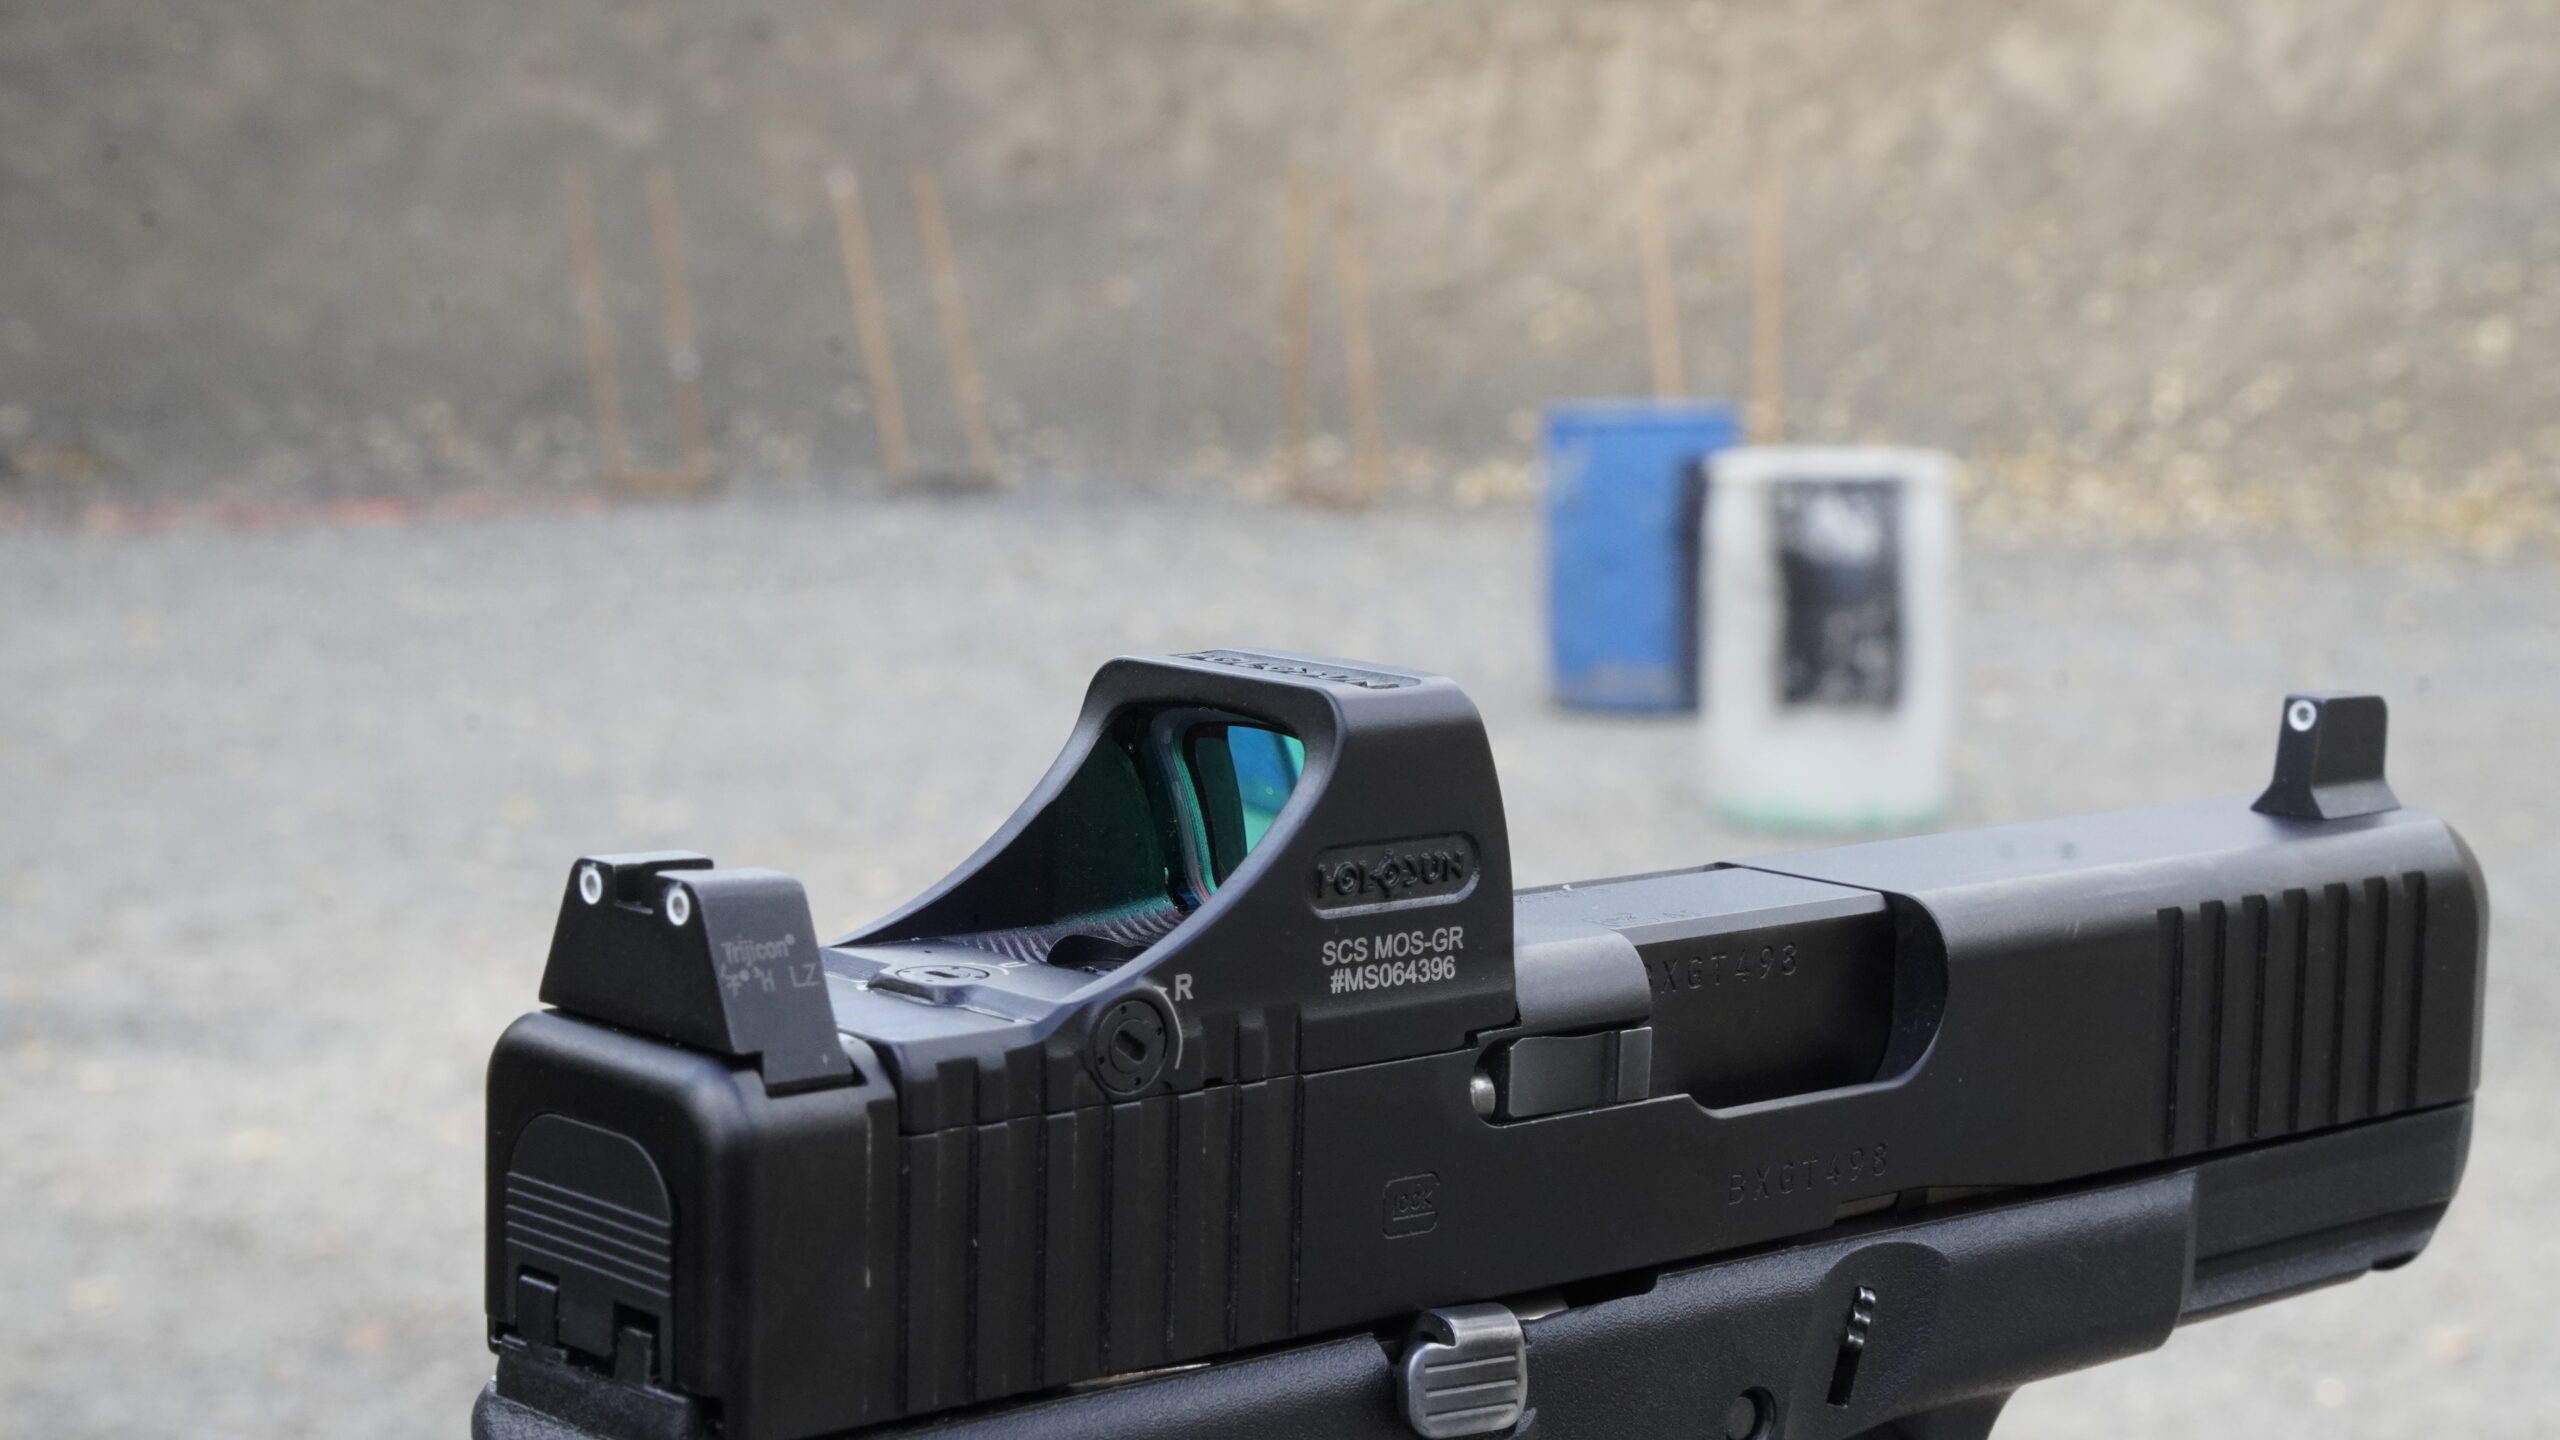 Co-witnessed glock sights combined with a red dot.